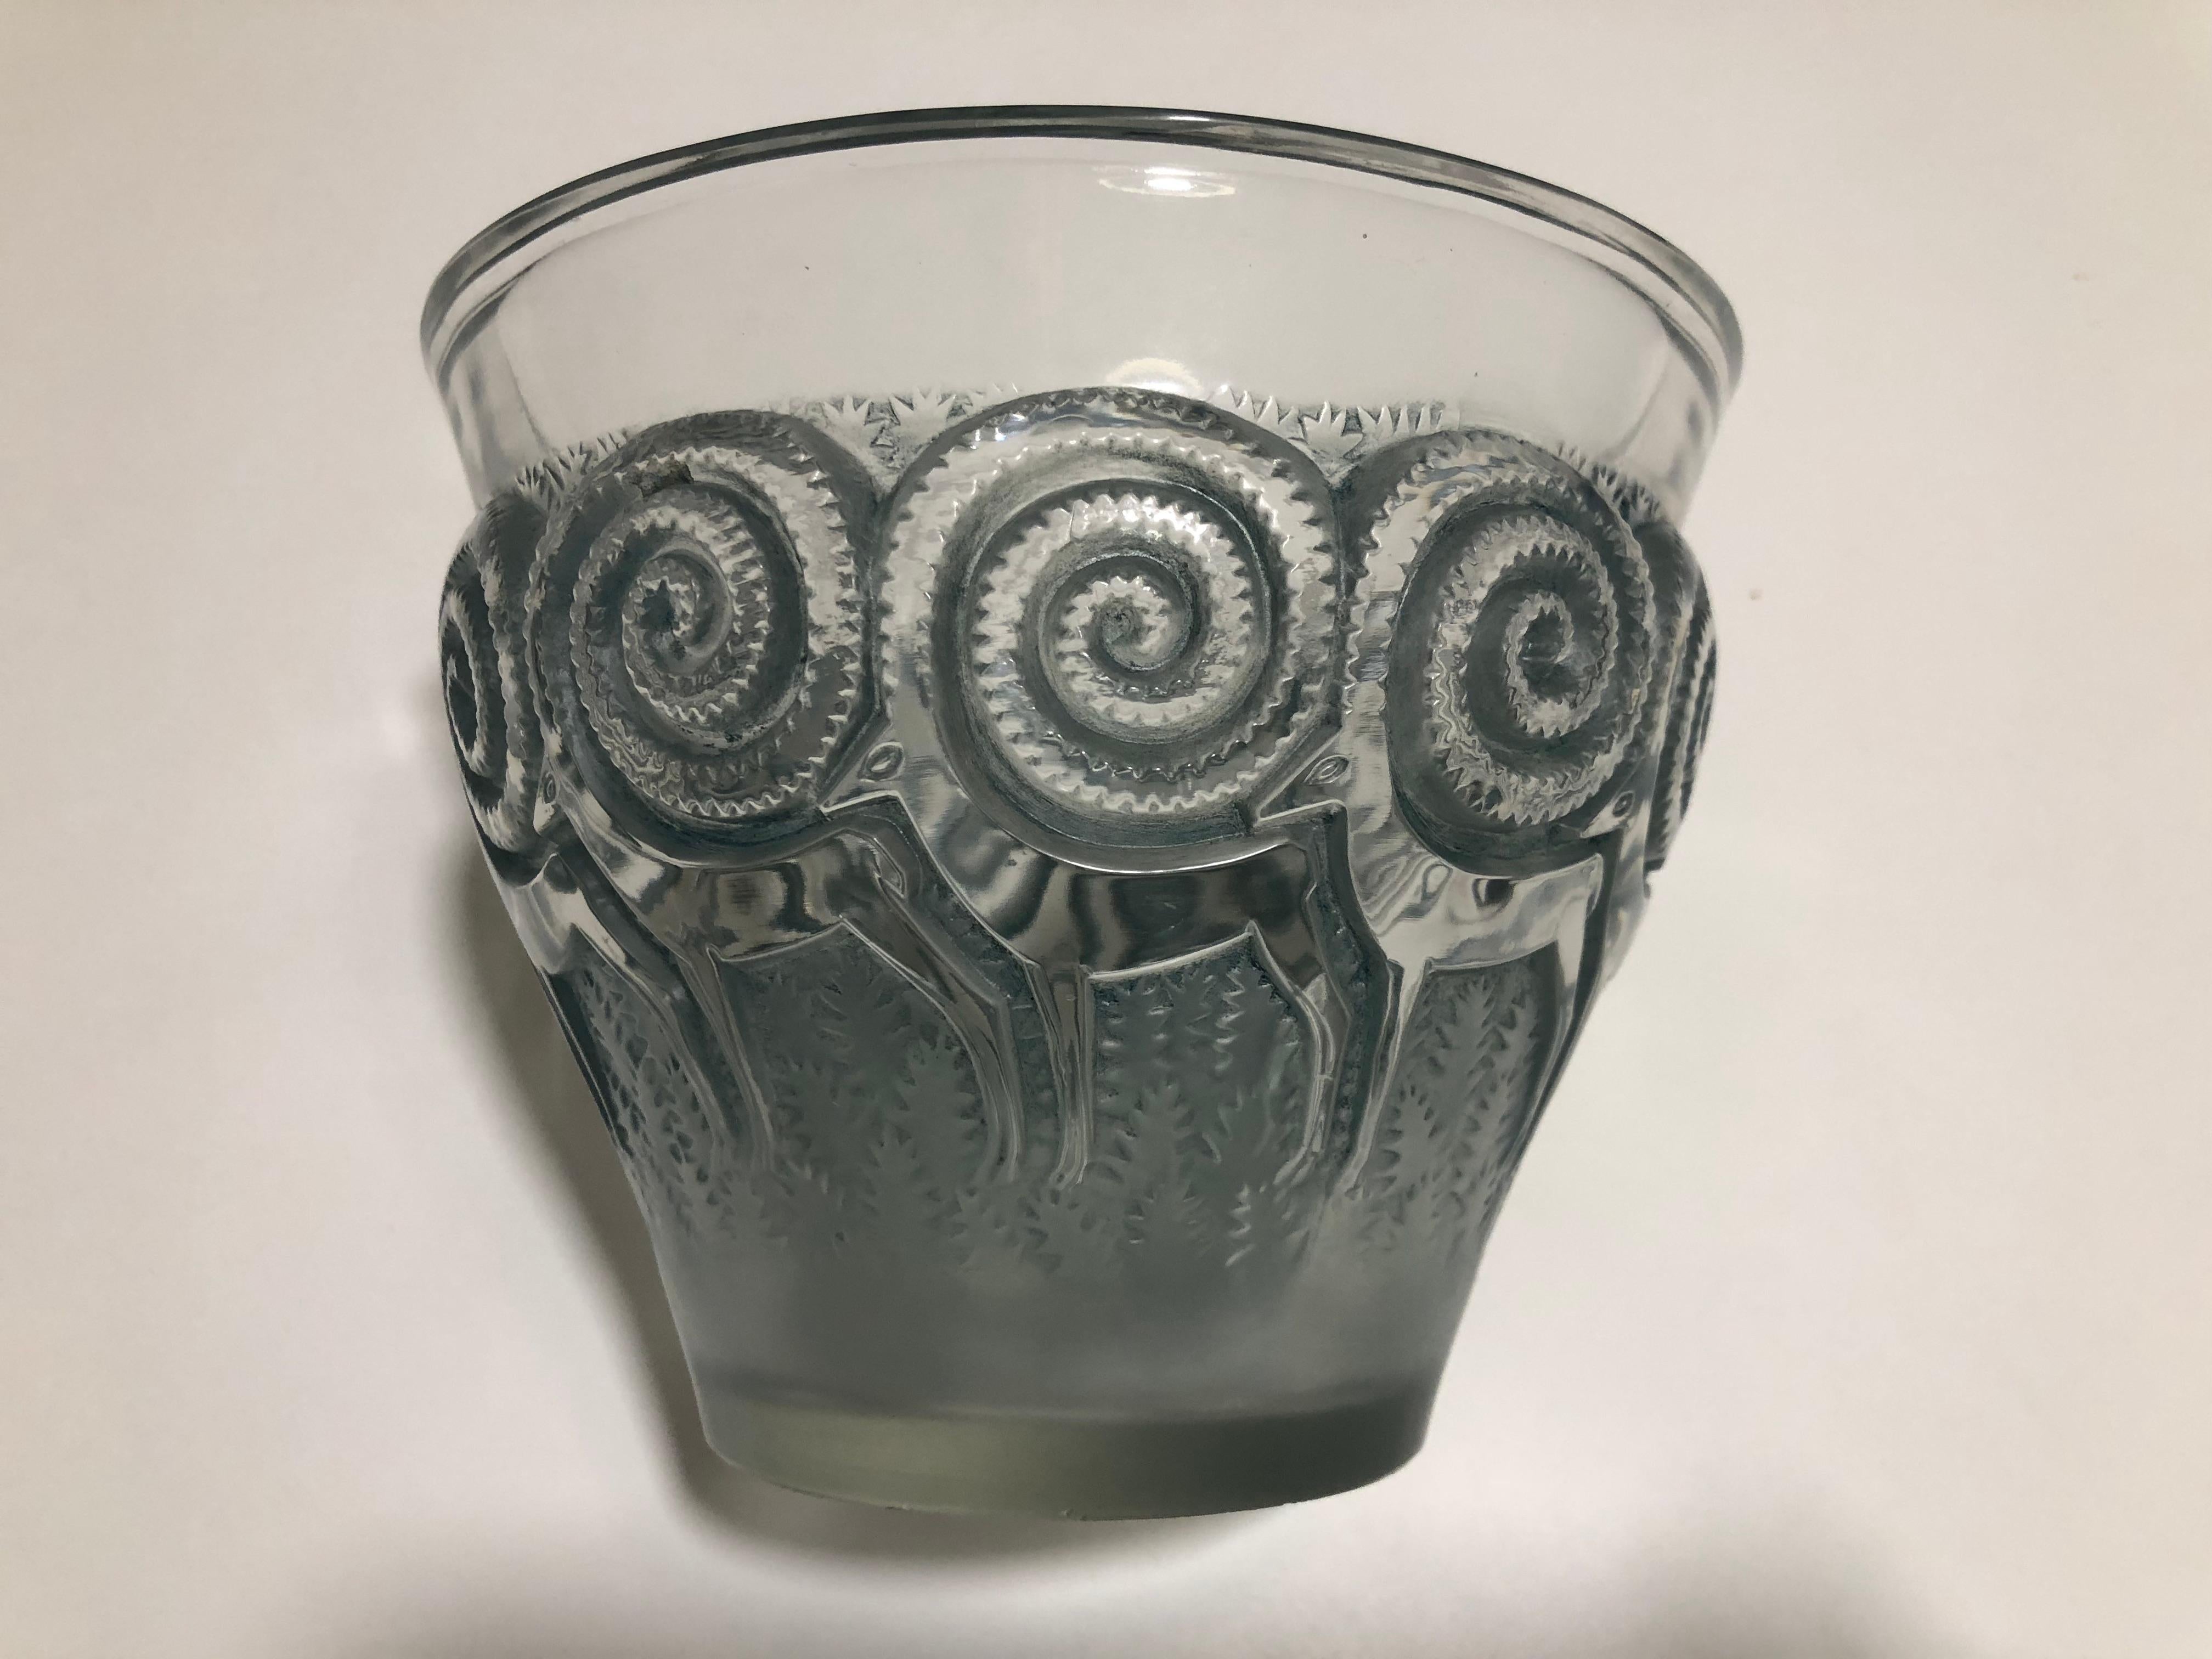 Rene Lalique vase Rennes: Glass with a design of frosted reindeer with large racks covering most of the outside Bibliography: Marcilhac model: 10-875 model created in 1933
Signed etched R Lalique, France
Pressed molded glass highlighted with grey